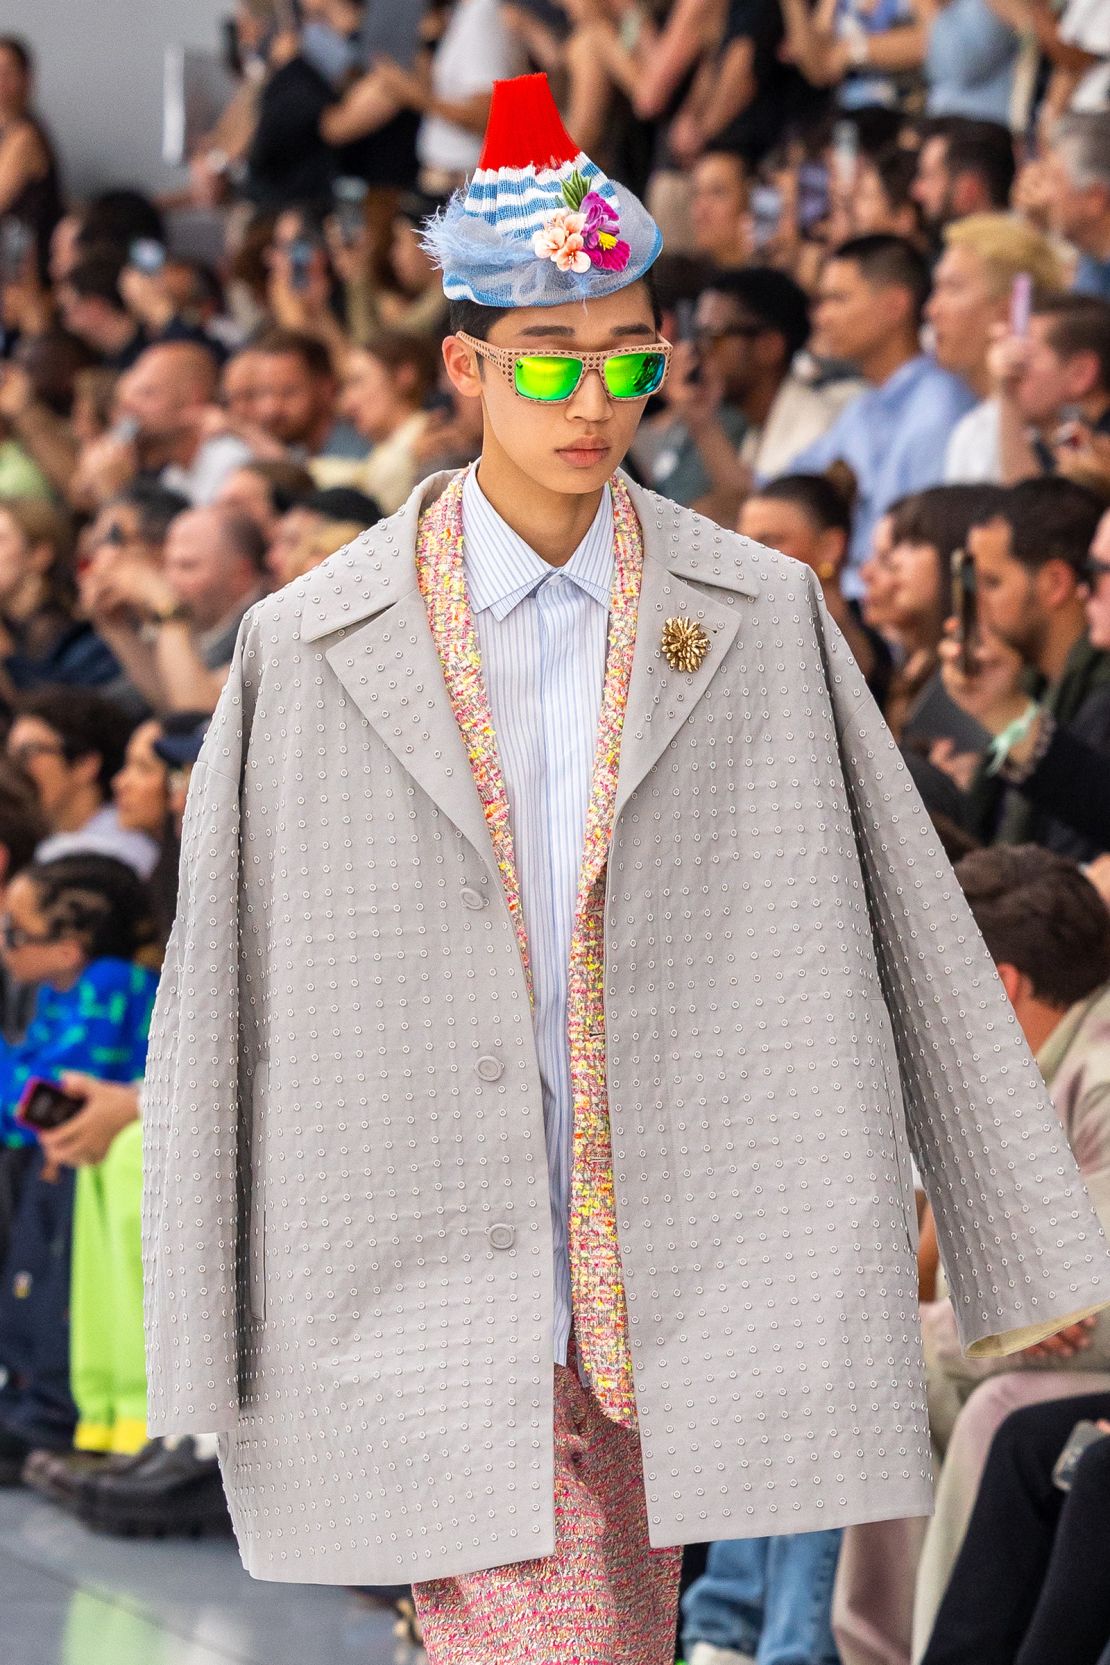 PARIS, FRANCE - JUNE 23: (EDITORIAL USE ONLY - For Non-Editorial use please seek approval from Fashion House) A model walks the runway during the Dior Homme Menswear Spring/Summer 2024 show as part of Paris Fashion Week on June 23, 2023 in Paris, France. (Photo by Marc Piasecki/WireImage)